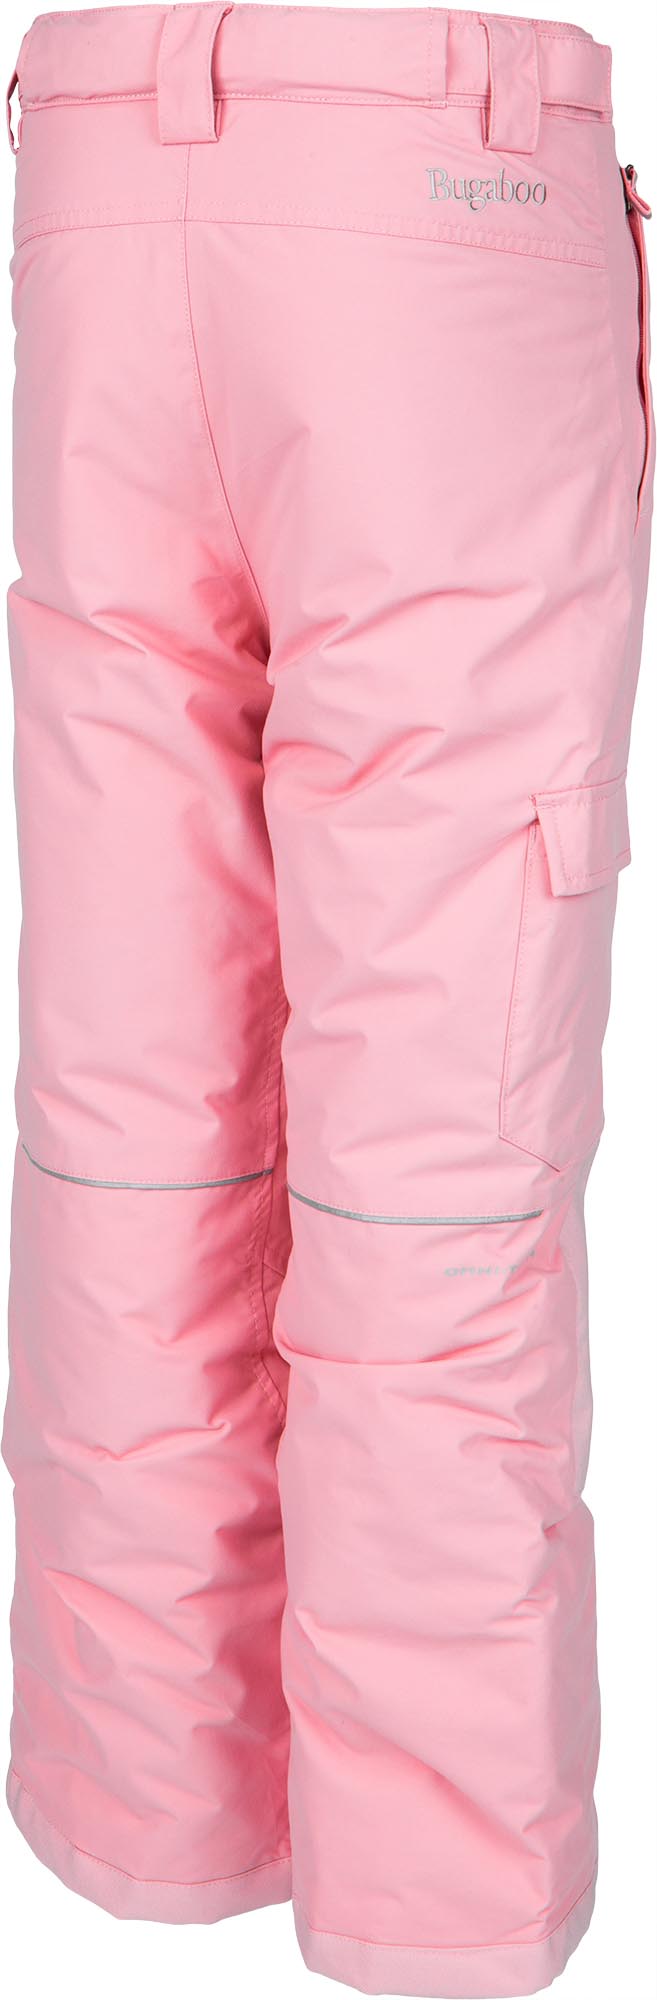 Children's insulated pants